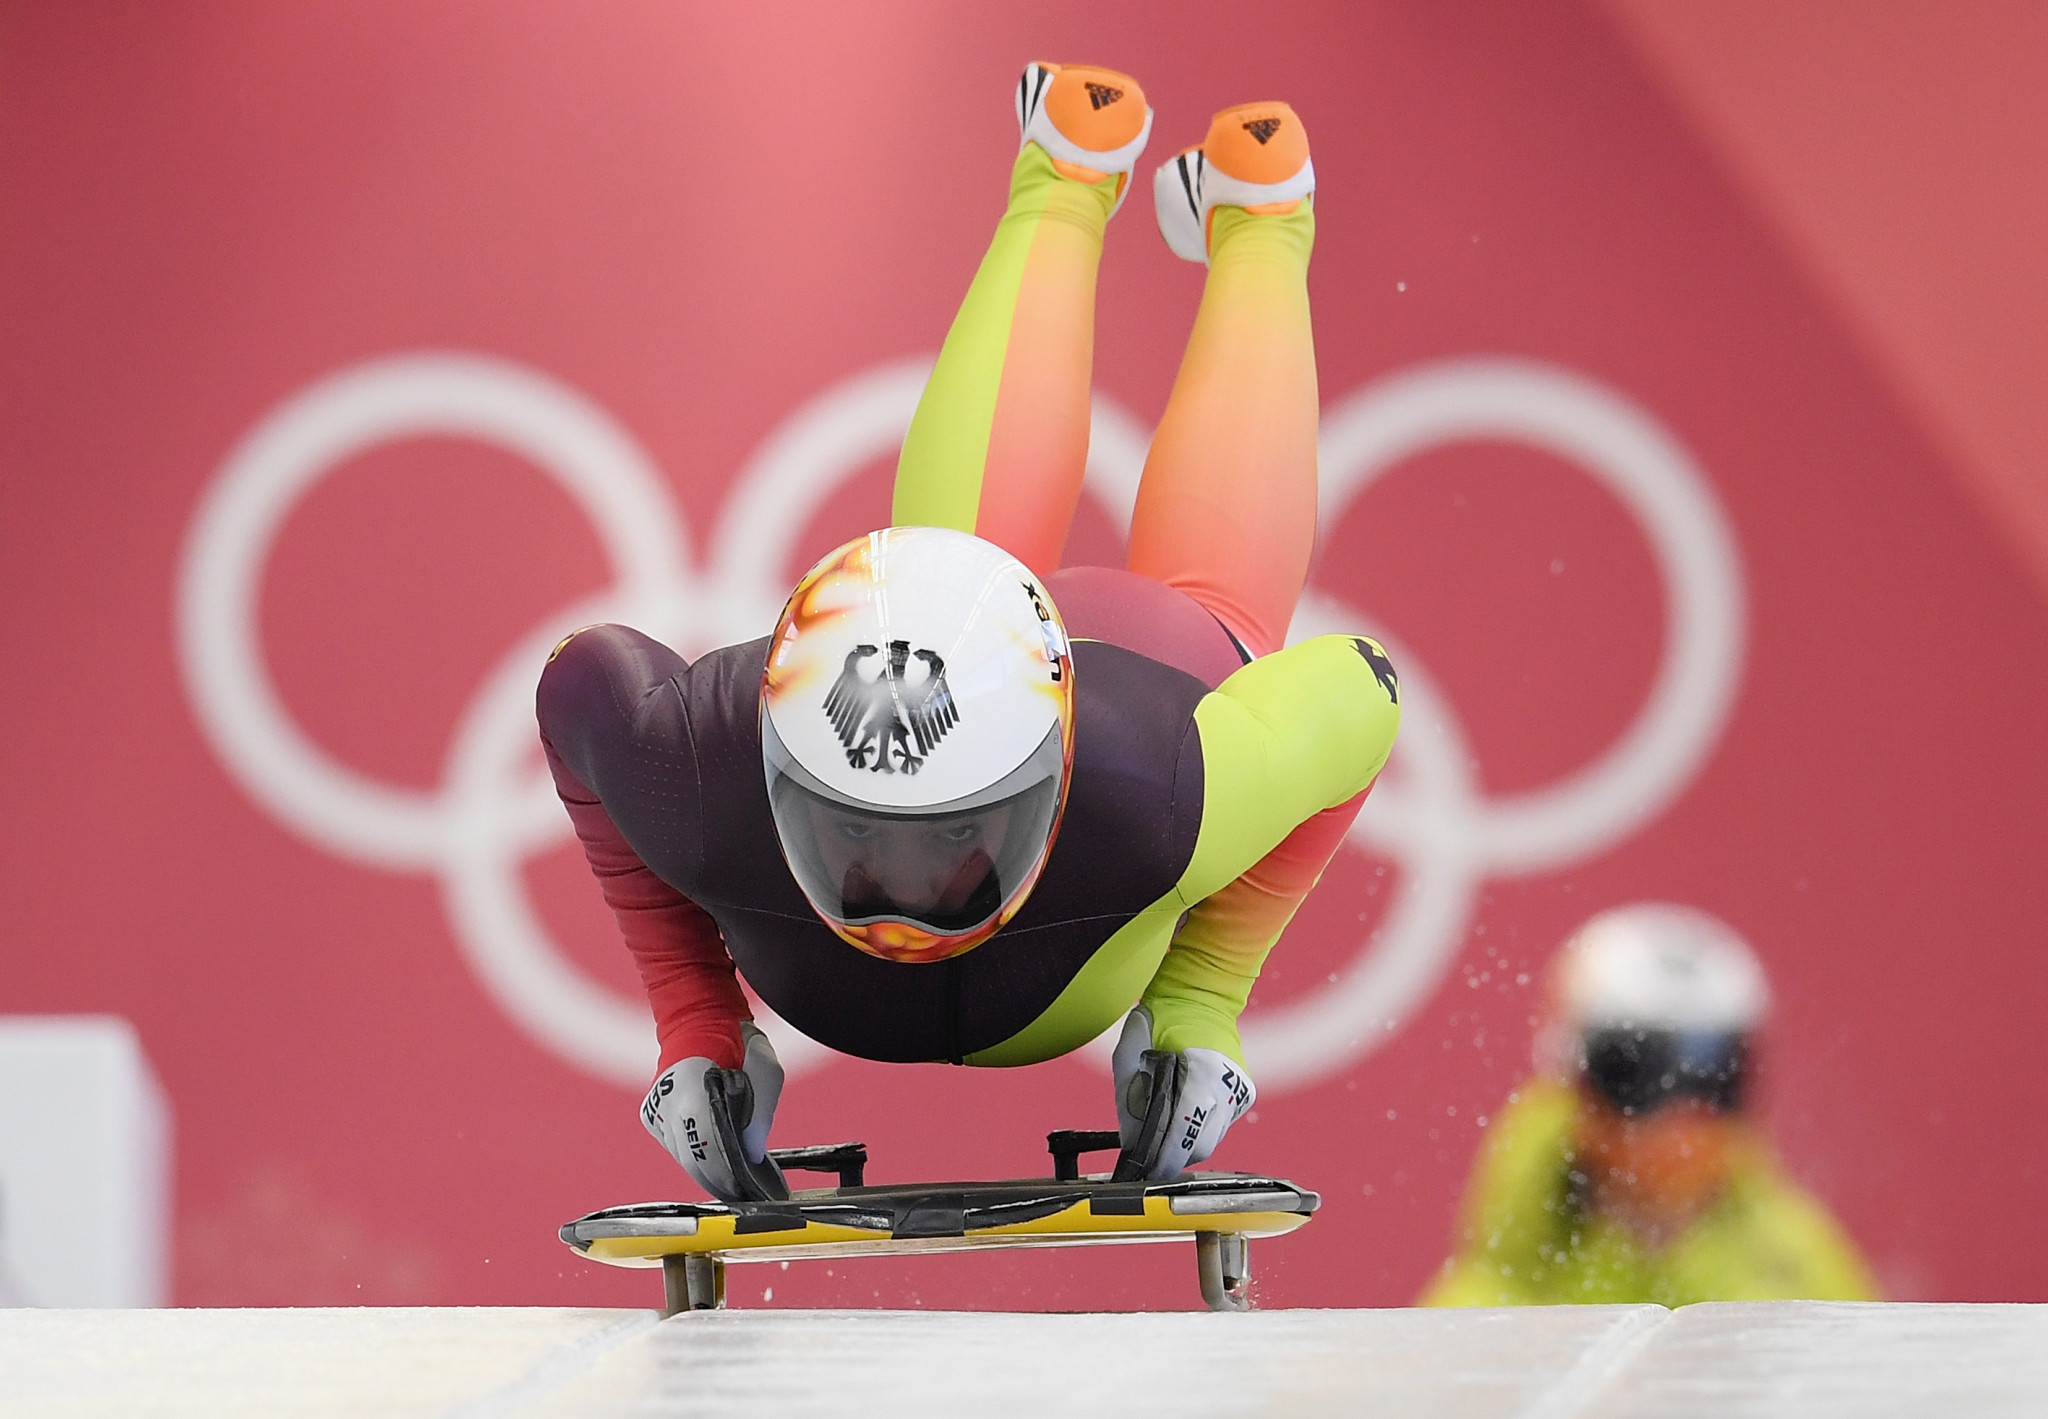 Anna Fernstädt competing for Germany at this year's Winter Olympic Games in Pyeongchang ©Getty Images 